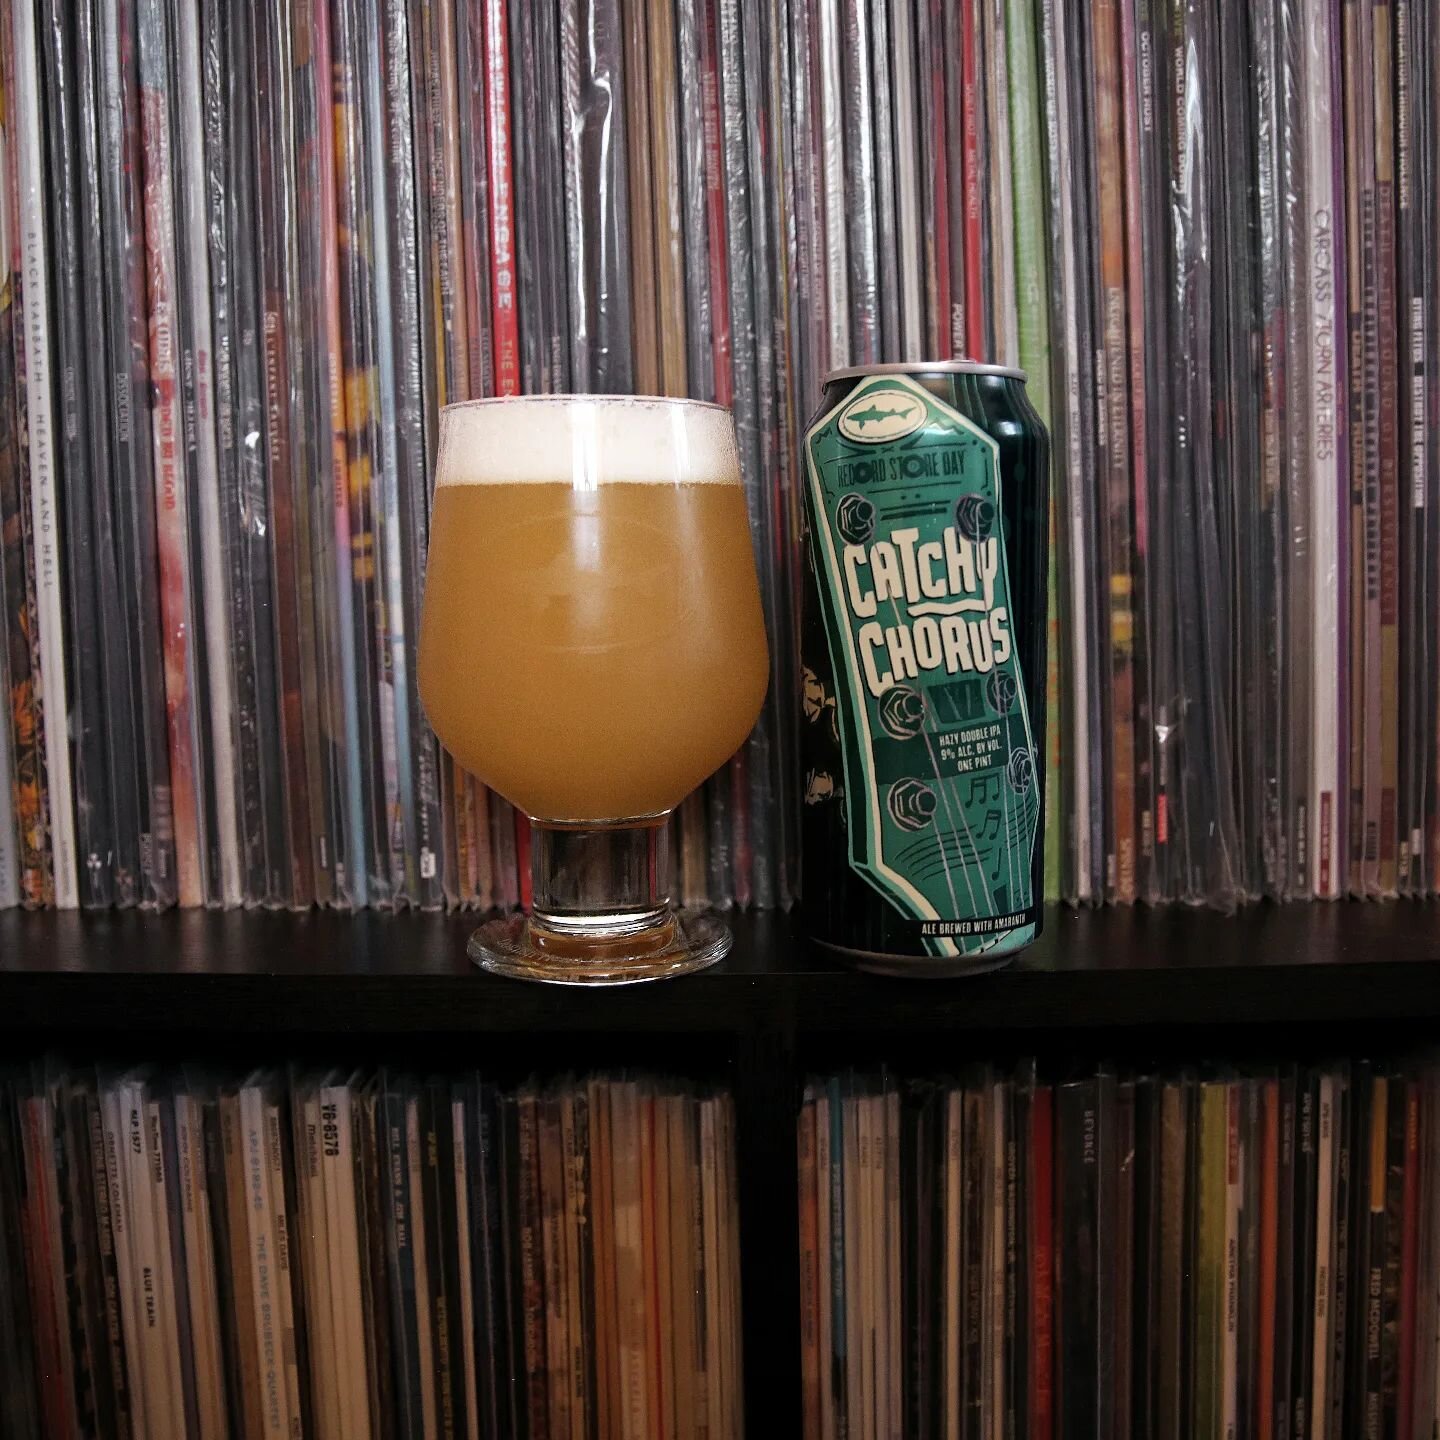 The only thing I love more than beer or records...is beer about records. 
.
@DogfishHead has had the distinct honor of brewing the Official Beer of #RecordStoreDay for eight consecutive years, and 2023's offering has me more pumped than ever for viny